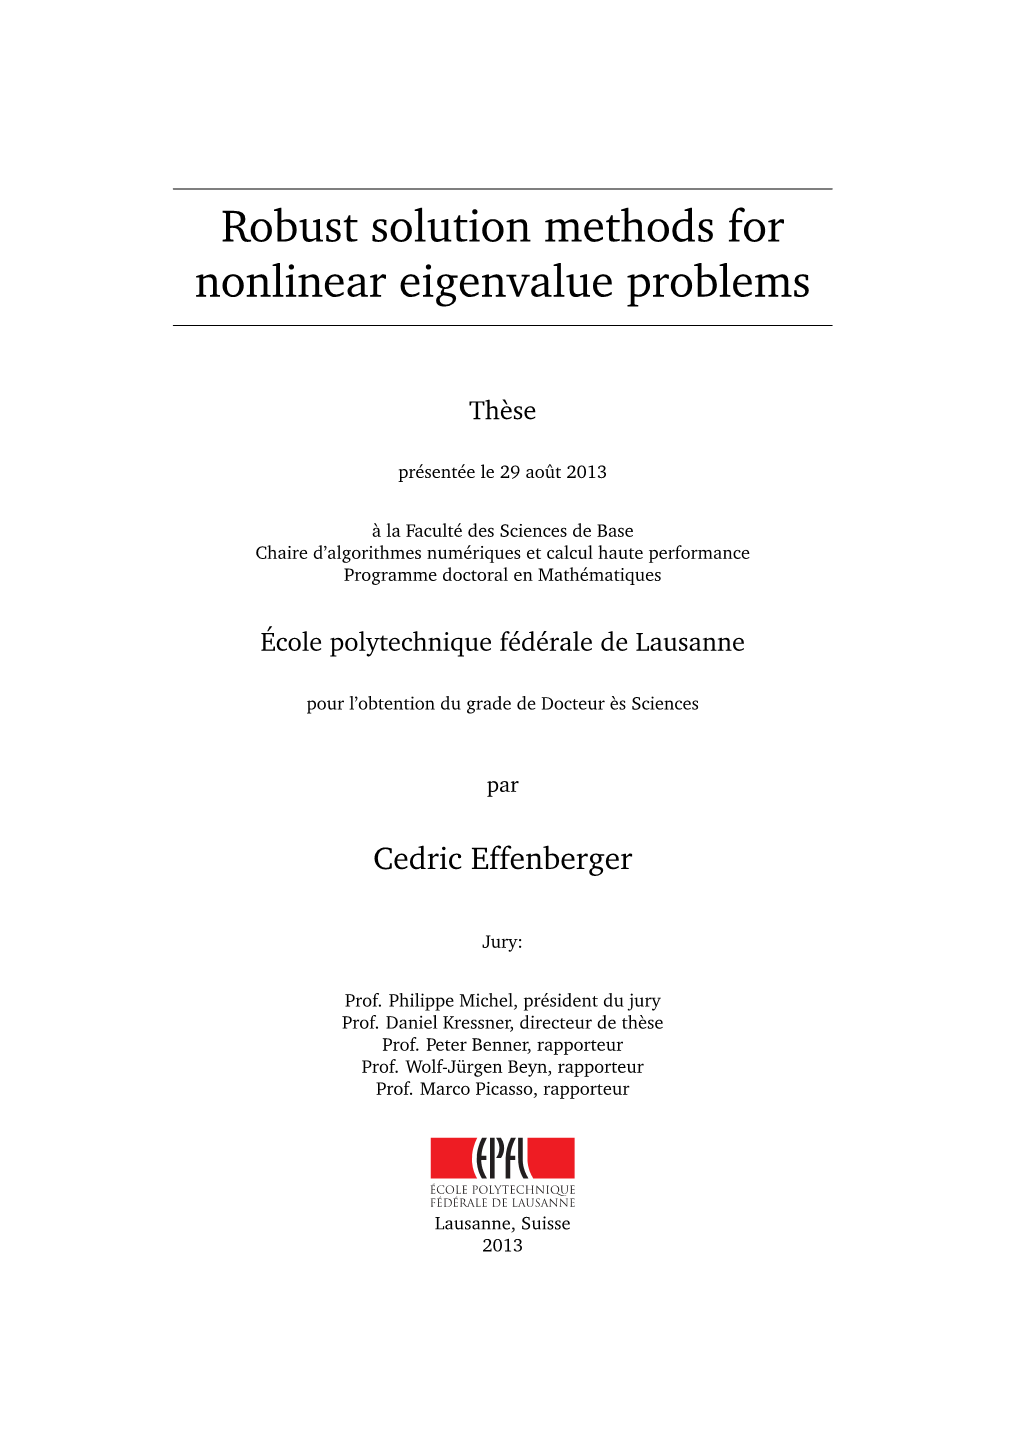 Robust Solution Methods for Nonlinear Eigenvalue Problems